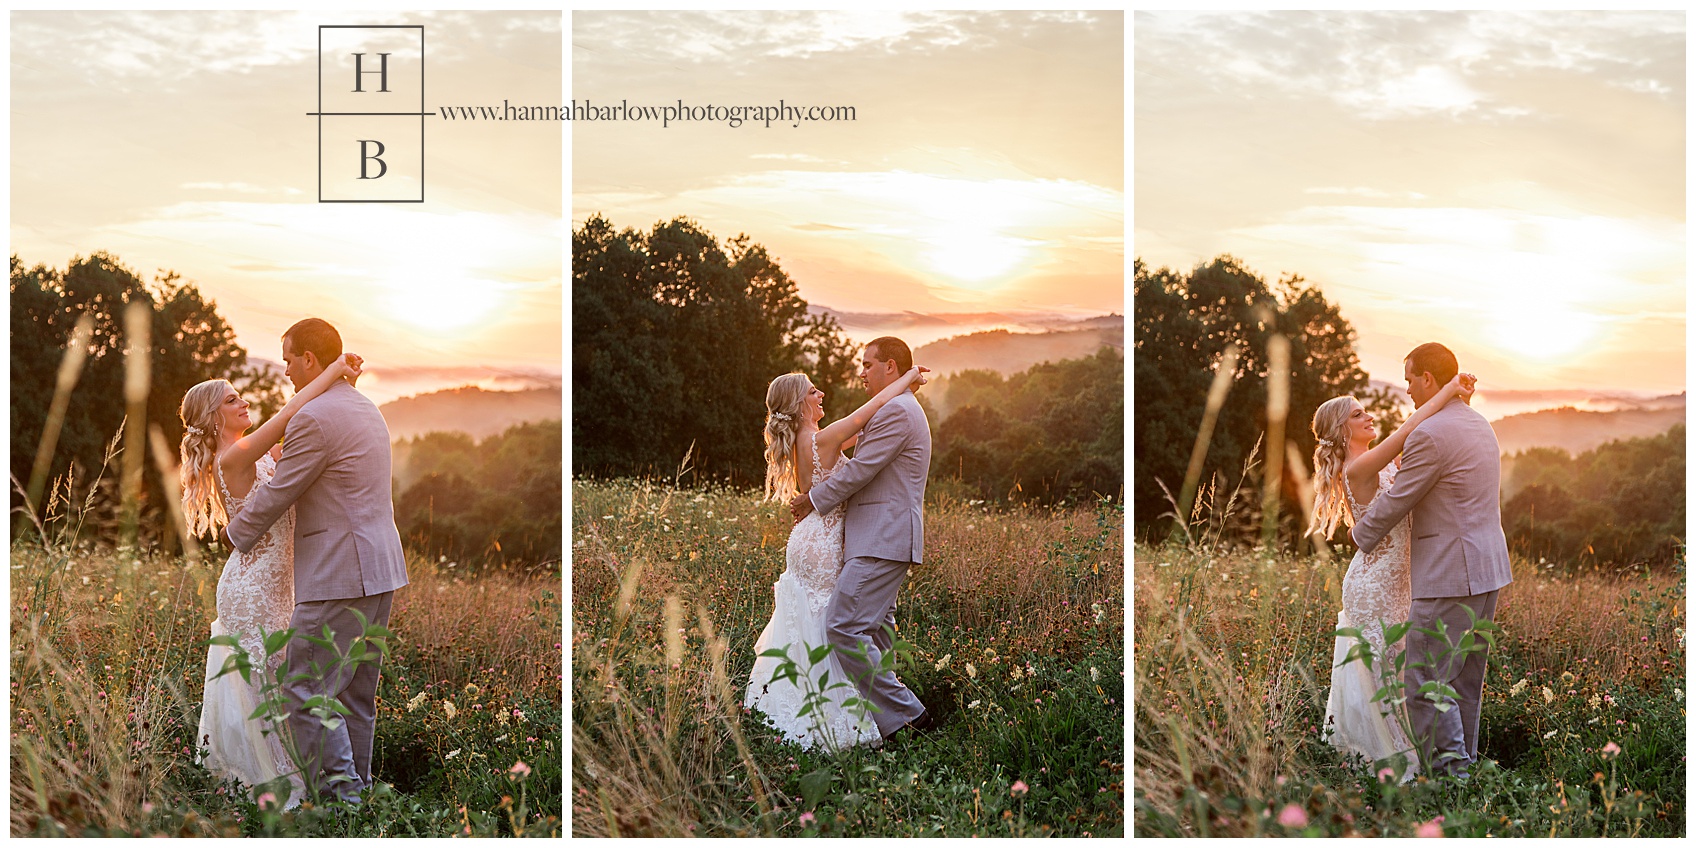 Bride and Groom Sunset Photos at The Barn on Enchanted Acres